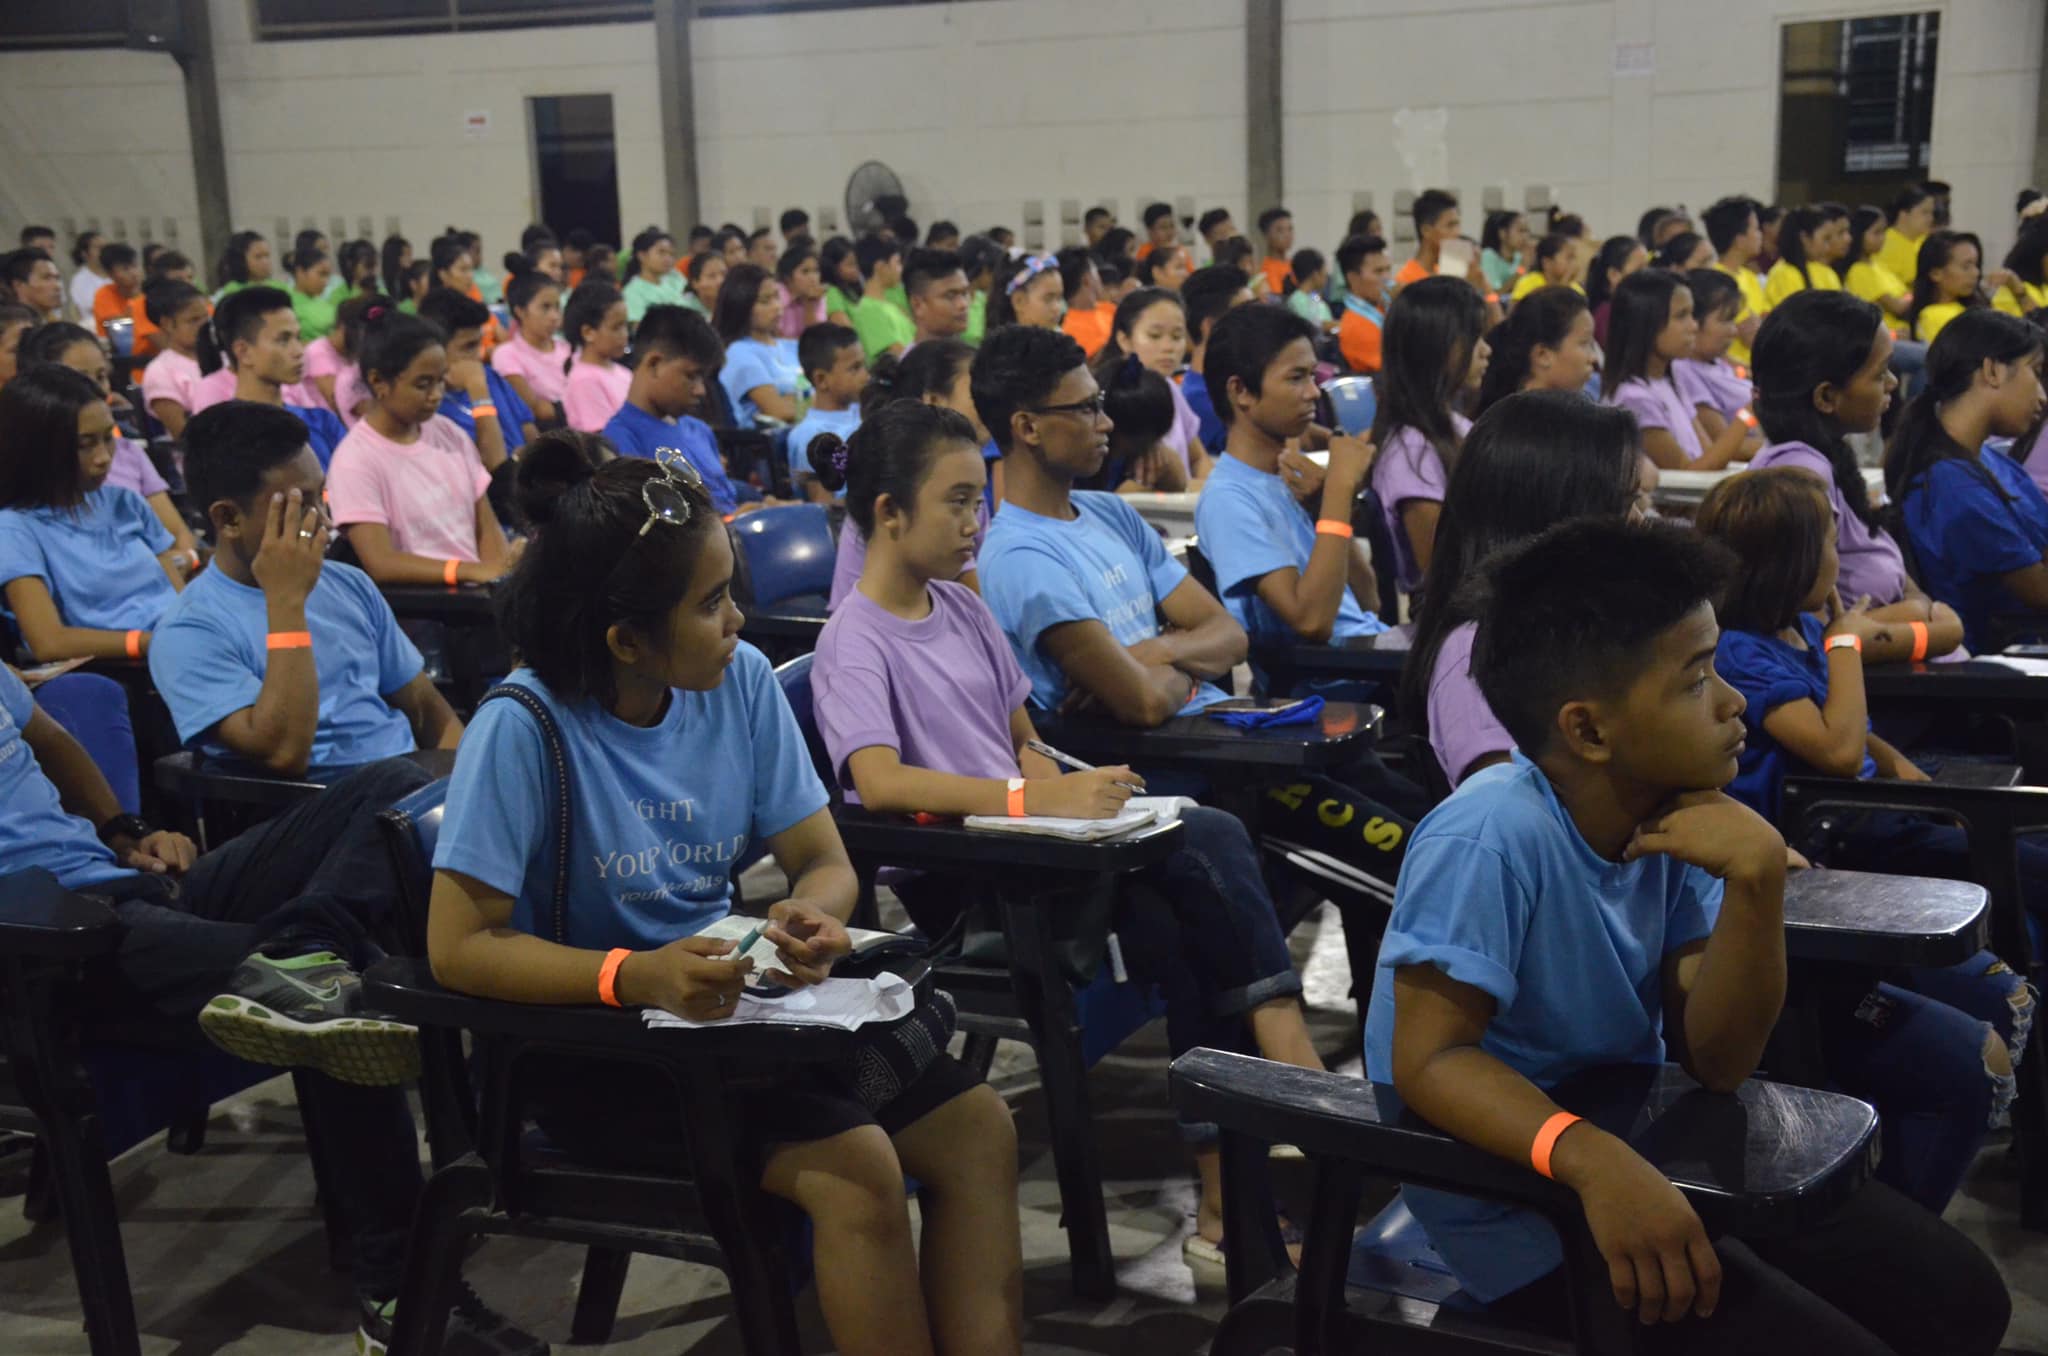 'Light Your World' Conference in Leyte, Philippines.